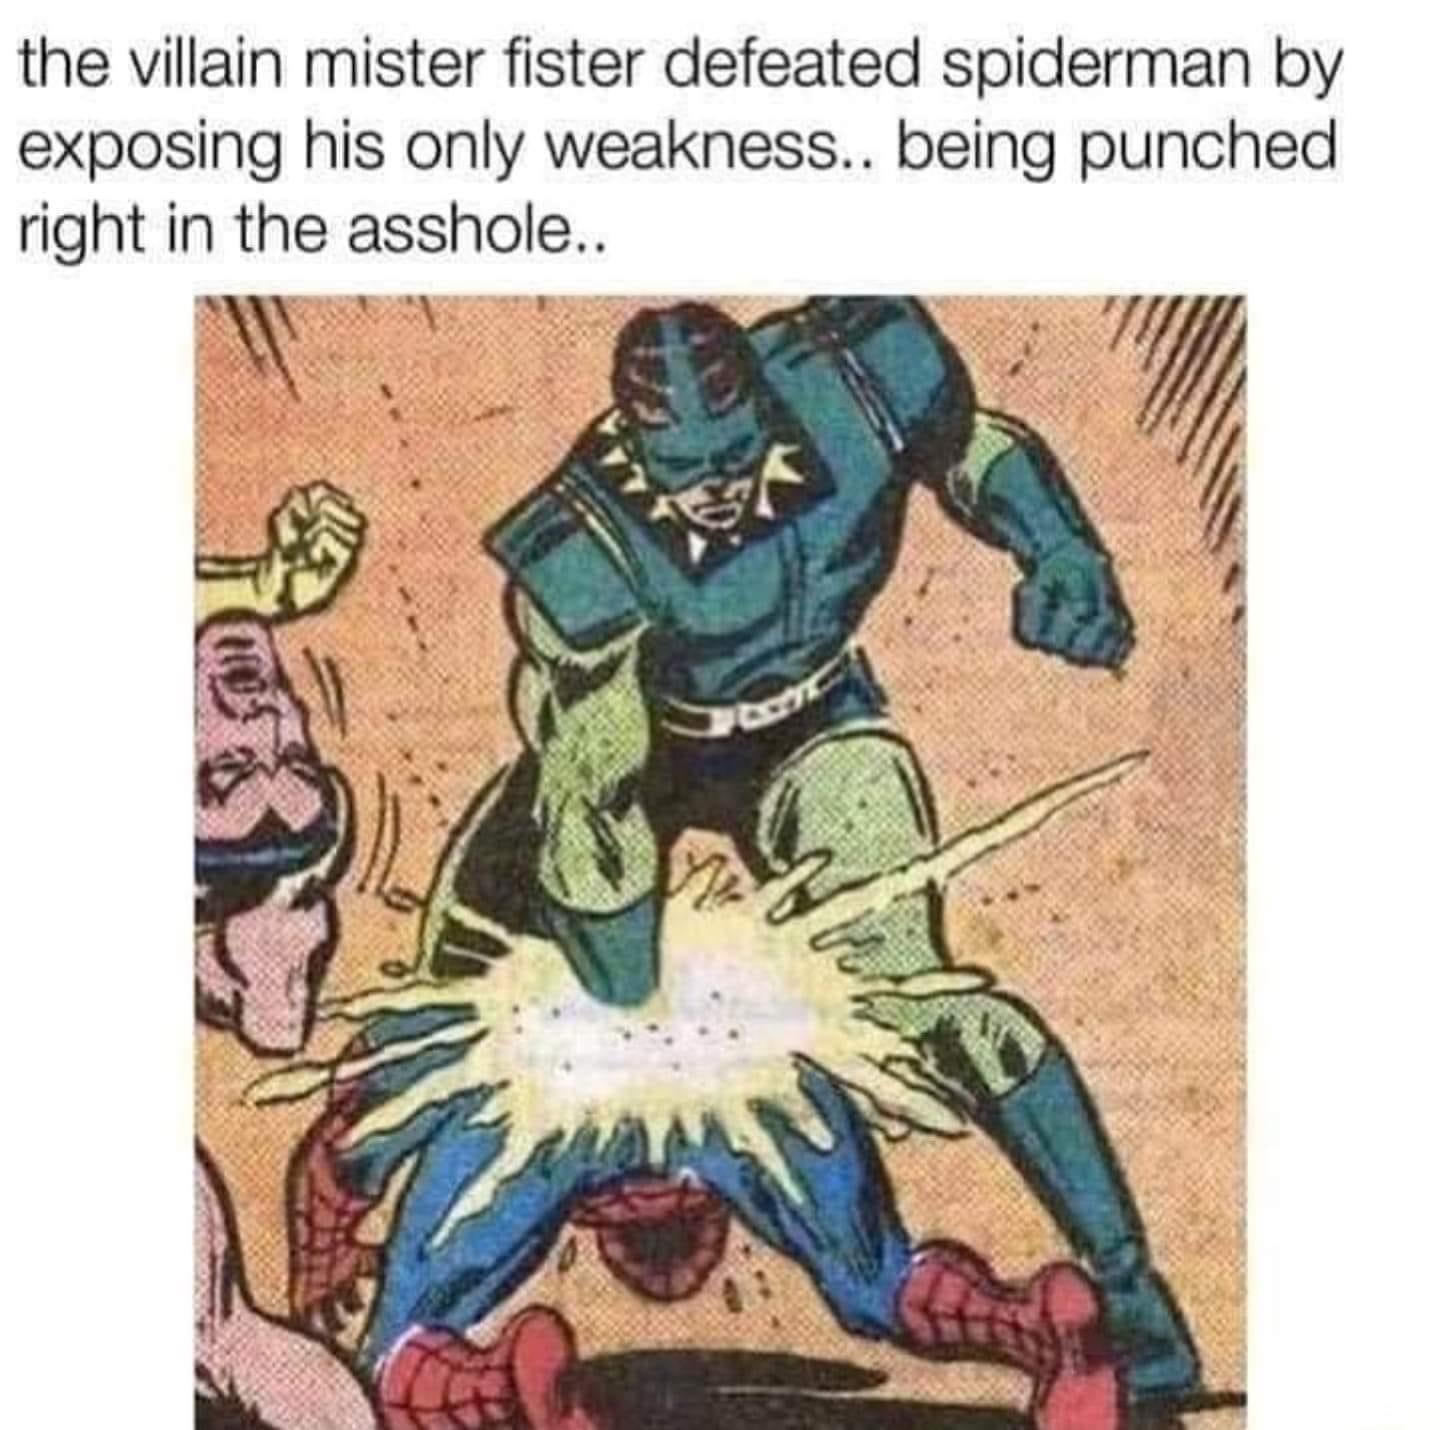 spiderman comic fail - the villain mister fister defeated spiderman by exposing his only weakness.. being punched right in the asshole..